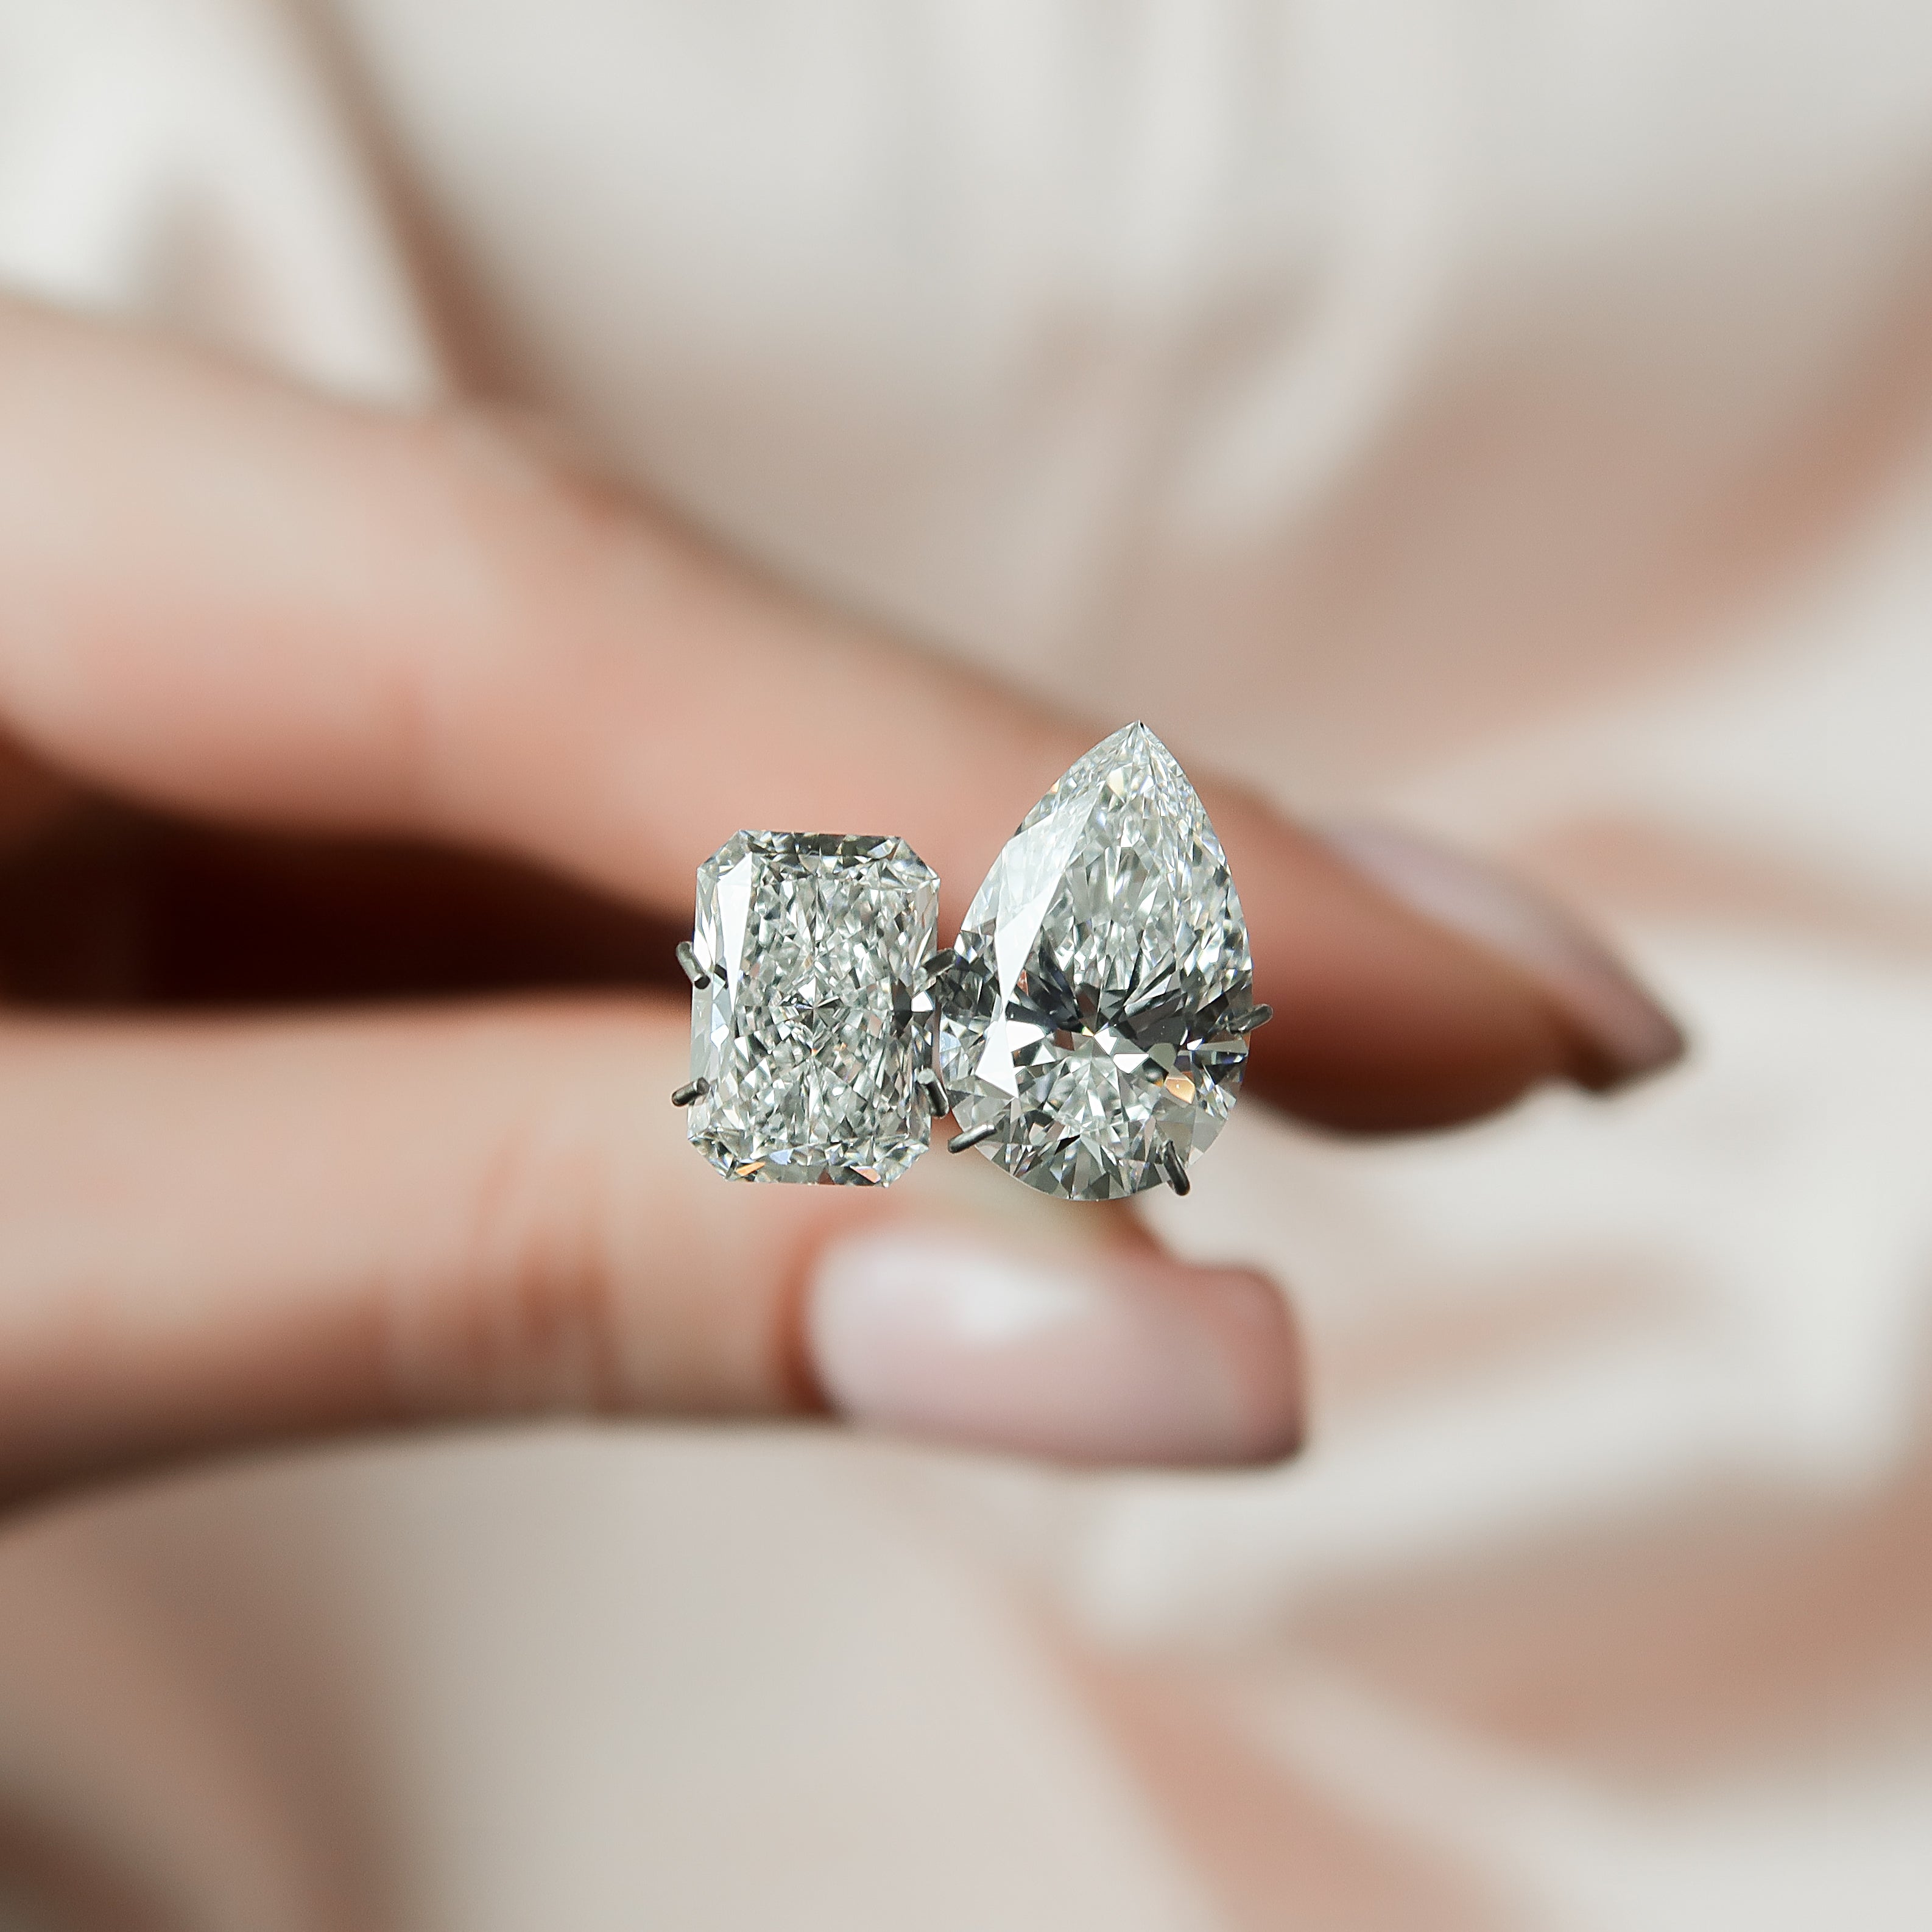 Natural Diamonds- Why They're a 'Natural' Choice for Your Engagement Ring